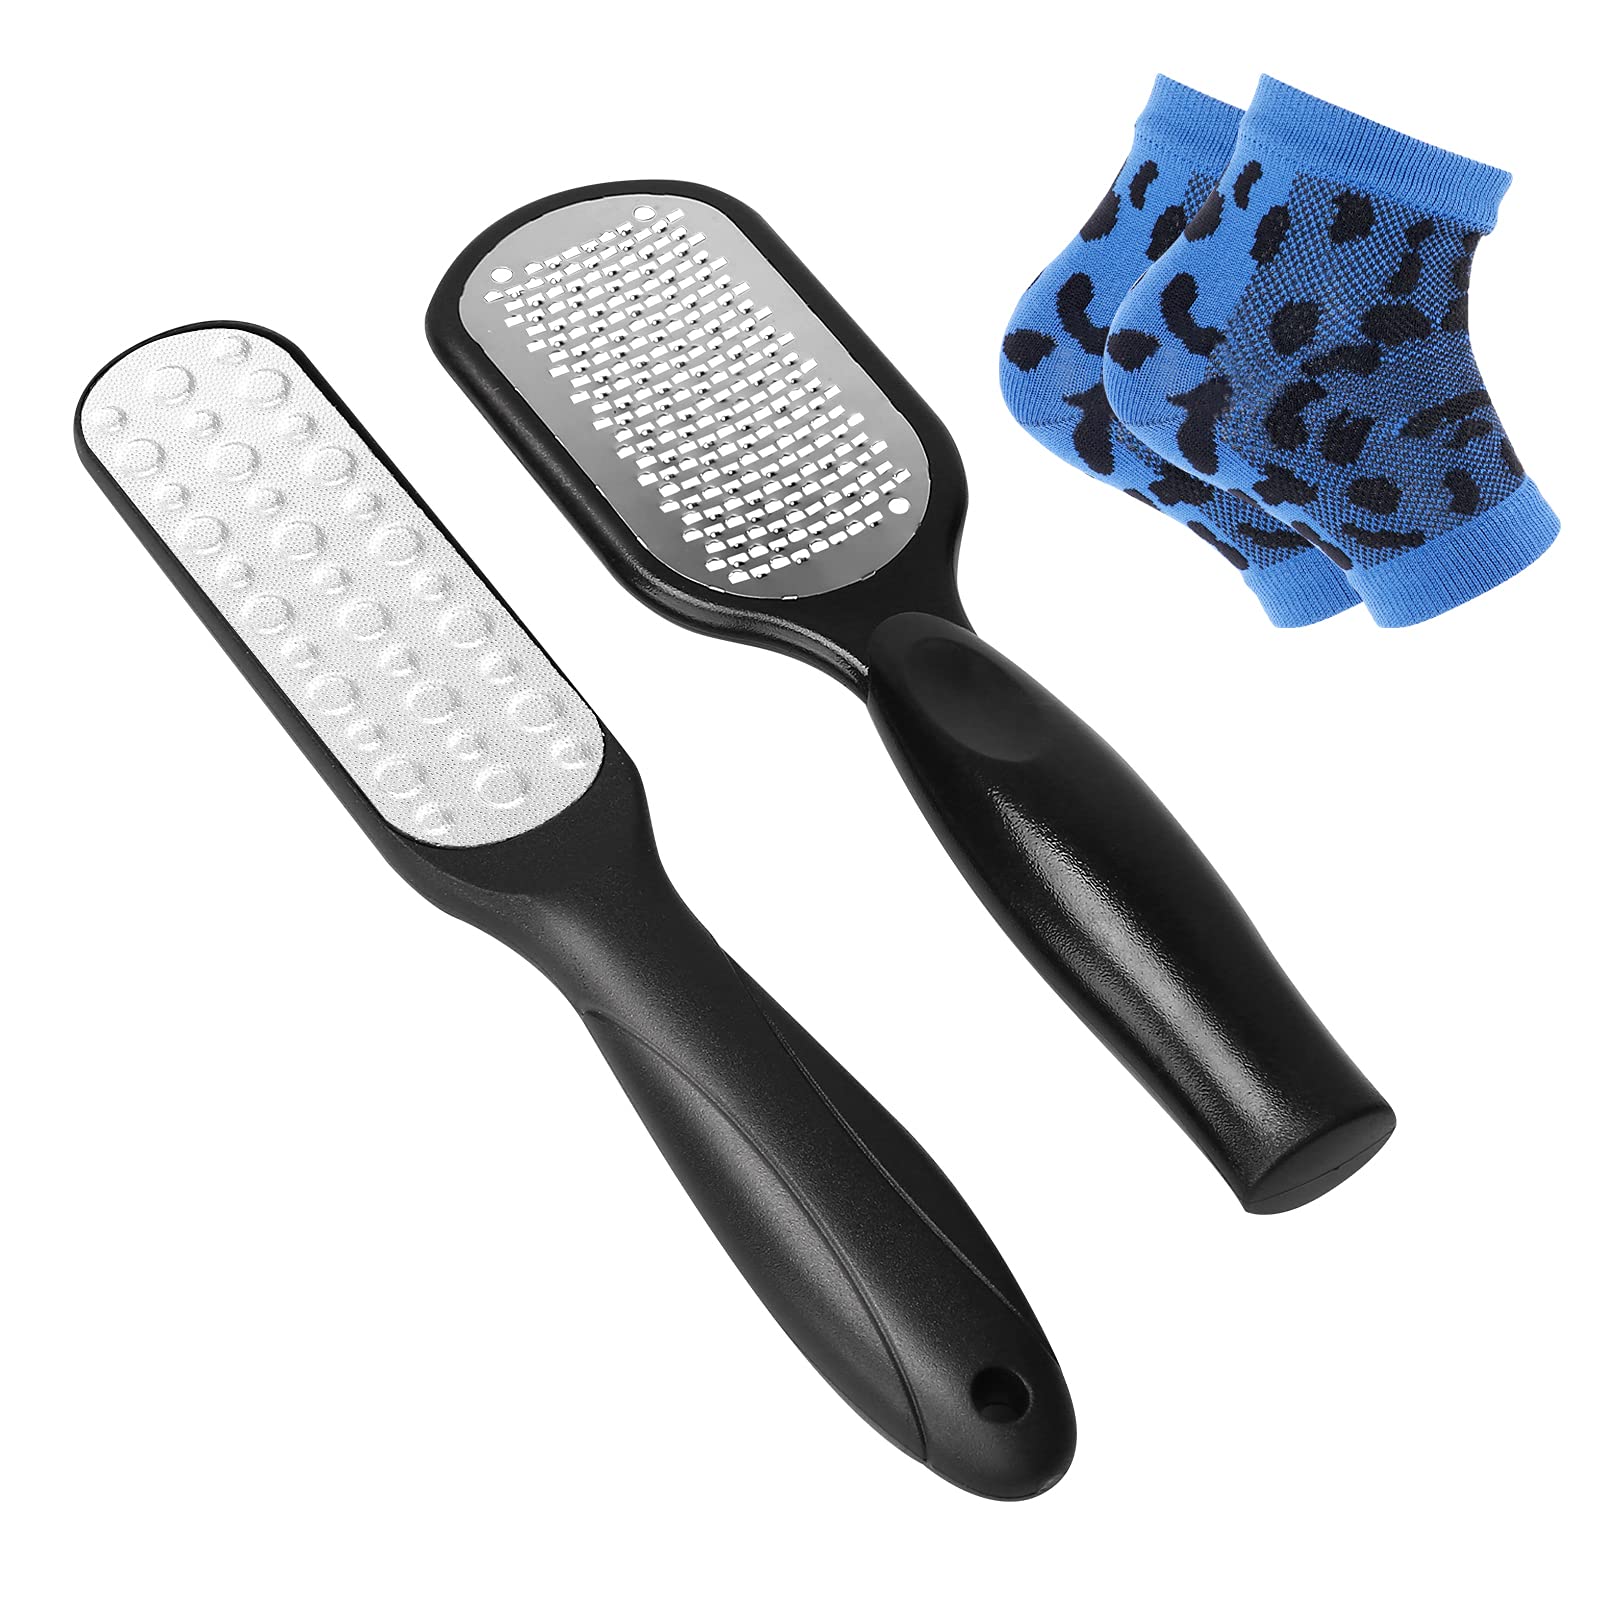 Foot File Rasp Callus Skin Remover Pedicure Tool for Cracked Rough Dead  Skin NEW